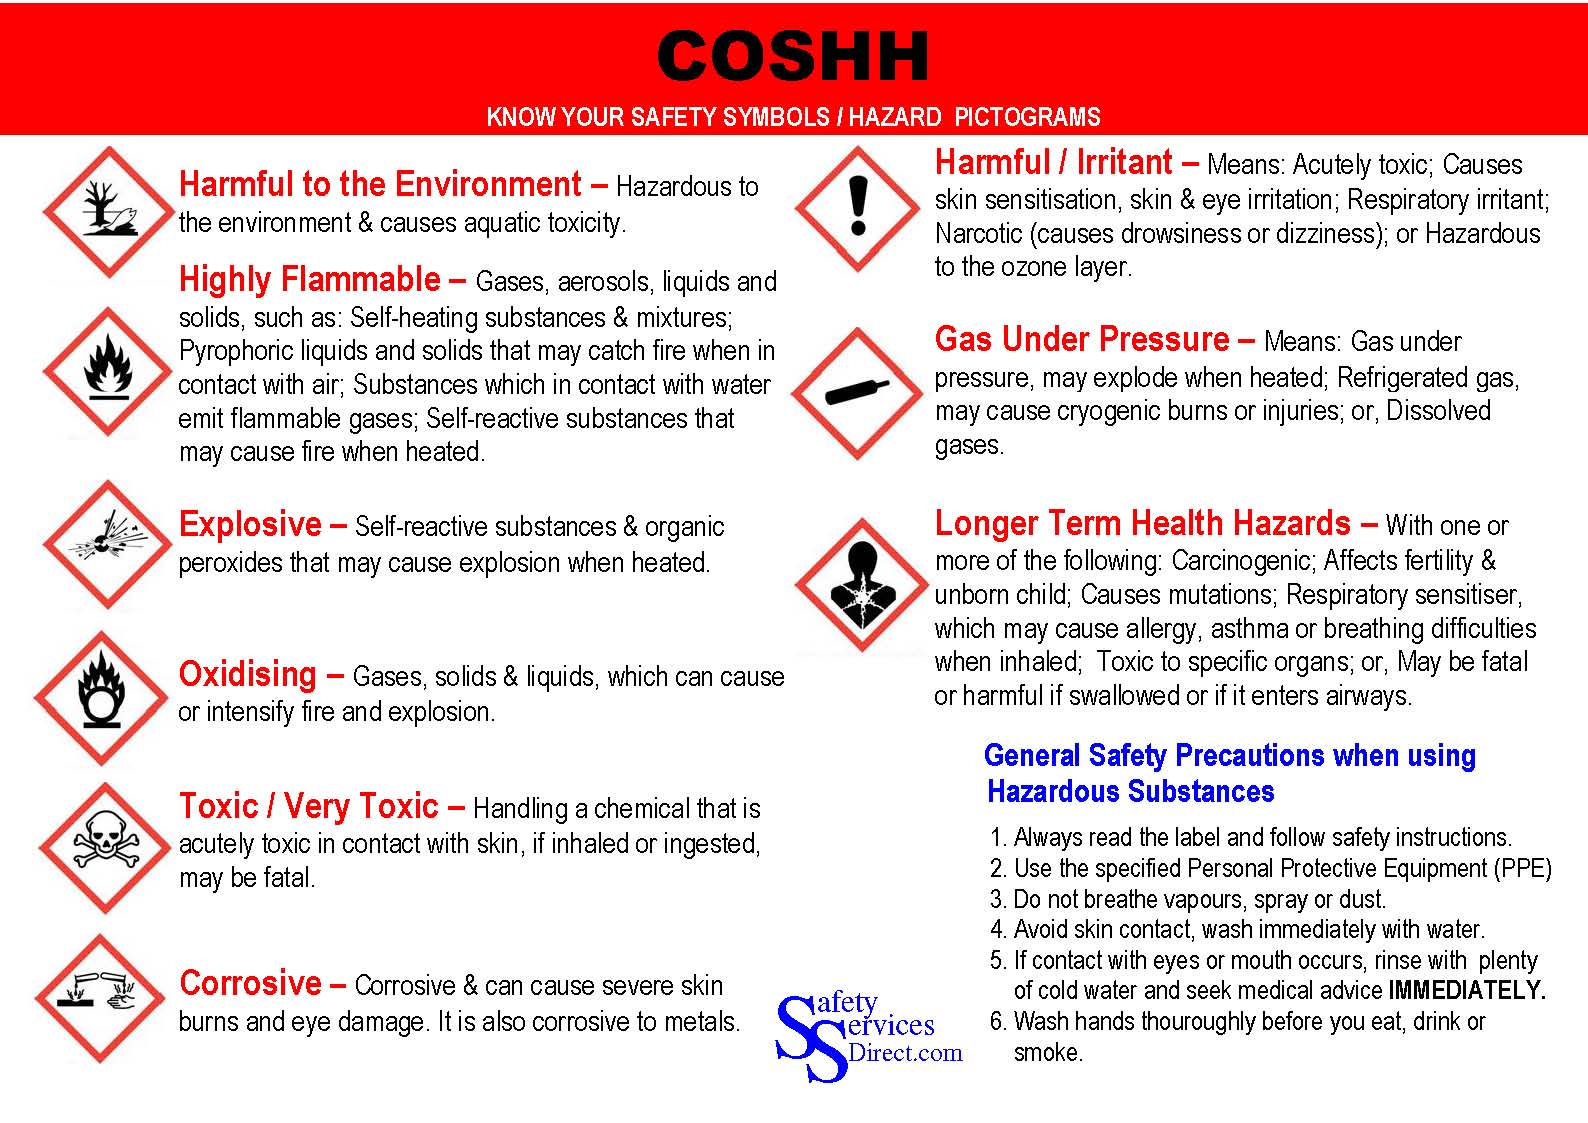 COSHH Training for Cleaners  How often?, laws, regulations & duration